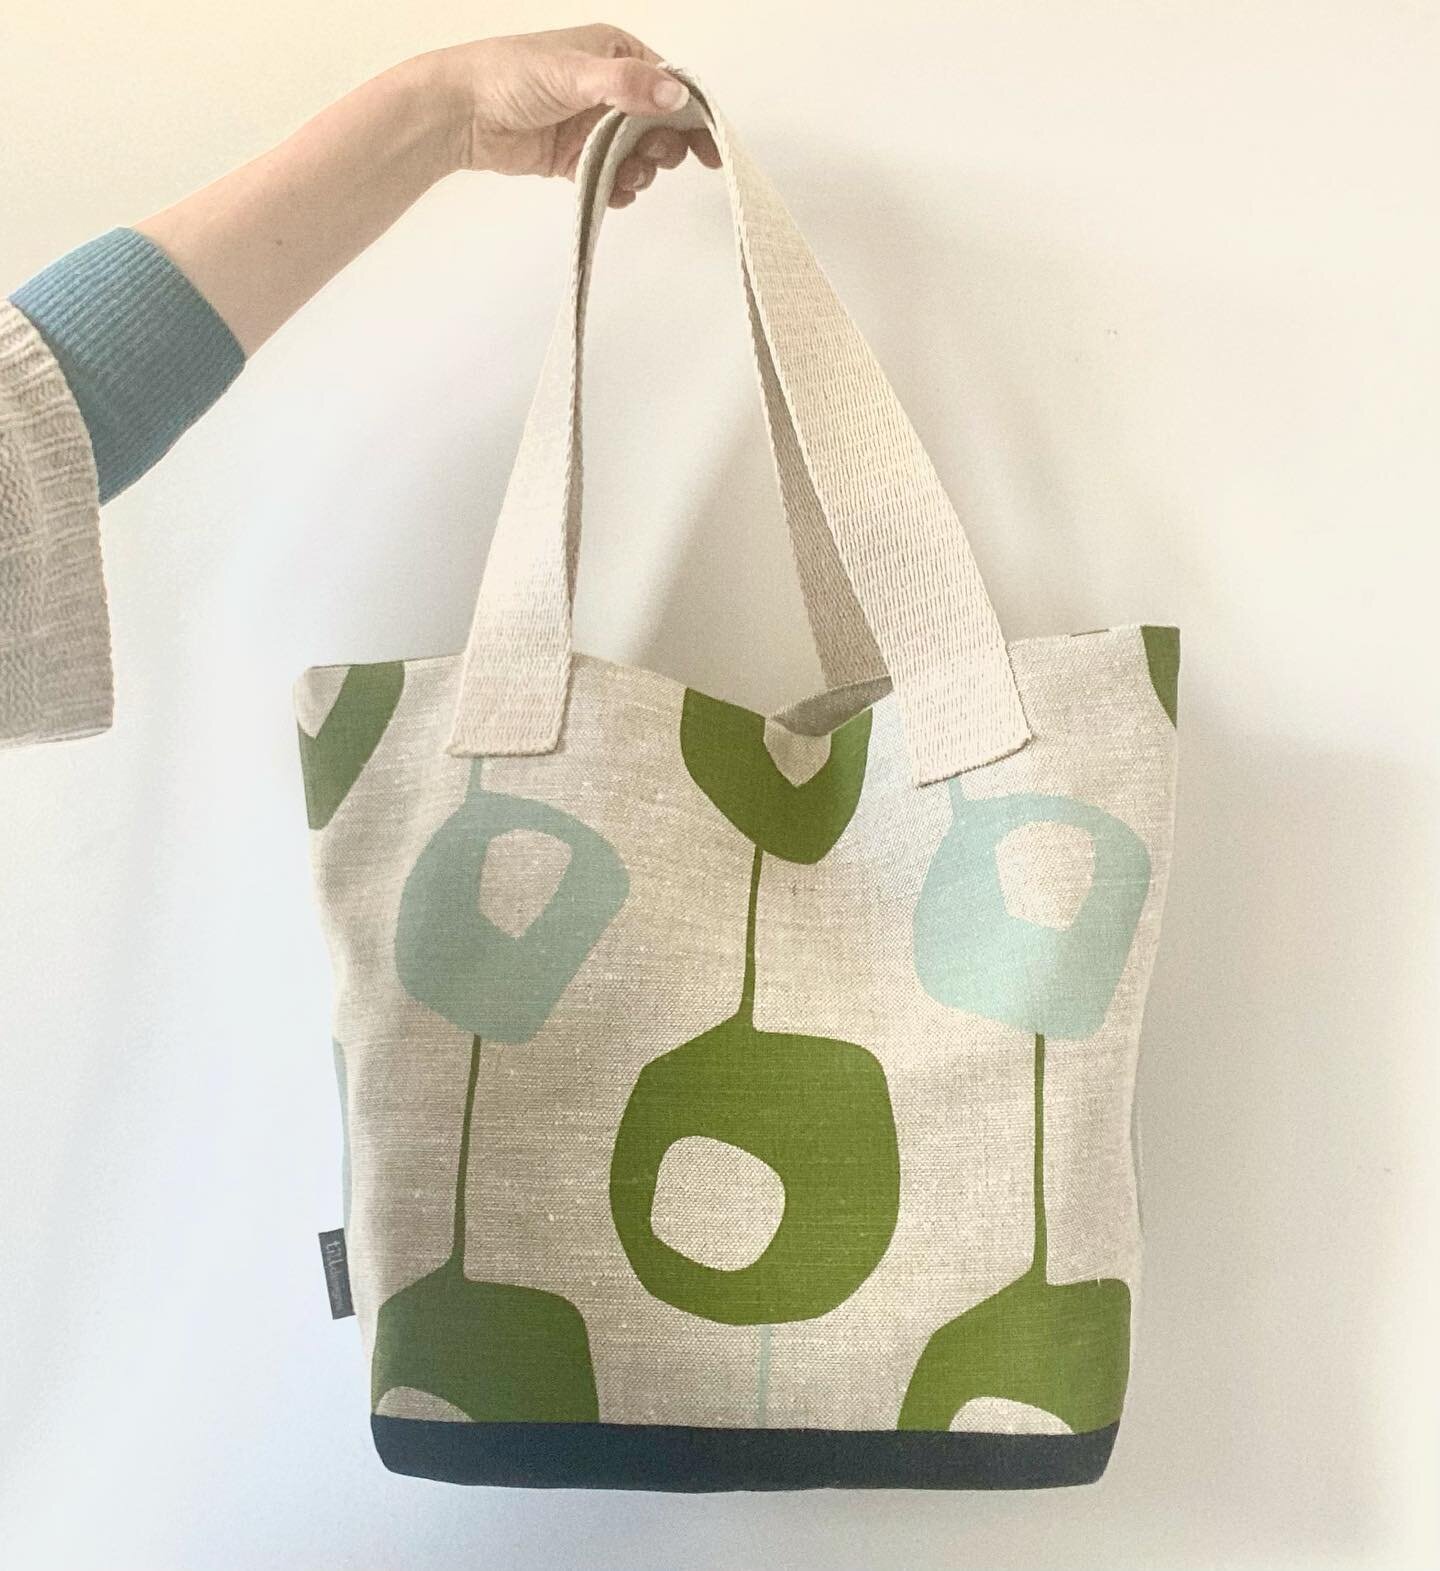 Coming soon at the @designedmadetas makers market 3rd and 4th Dec Town hall Tote bags in the Pod design, green and aqua 
#making #creating #micro #production #textiles #totes #handprinted #linen #tasmanianmade